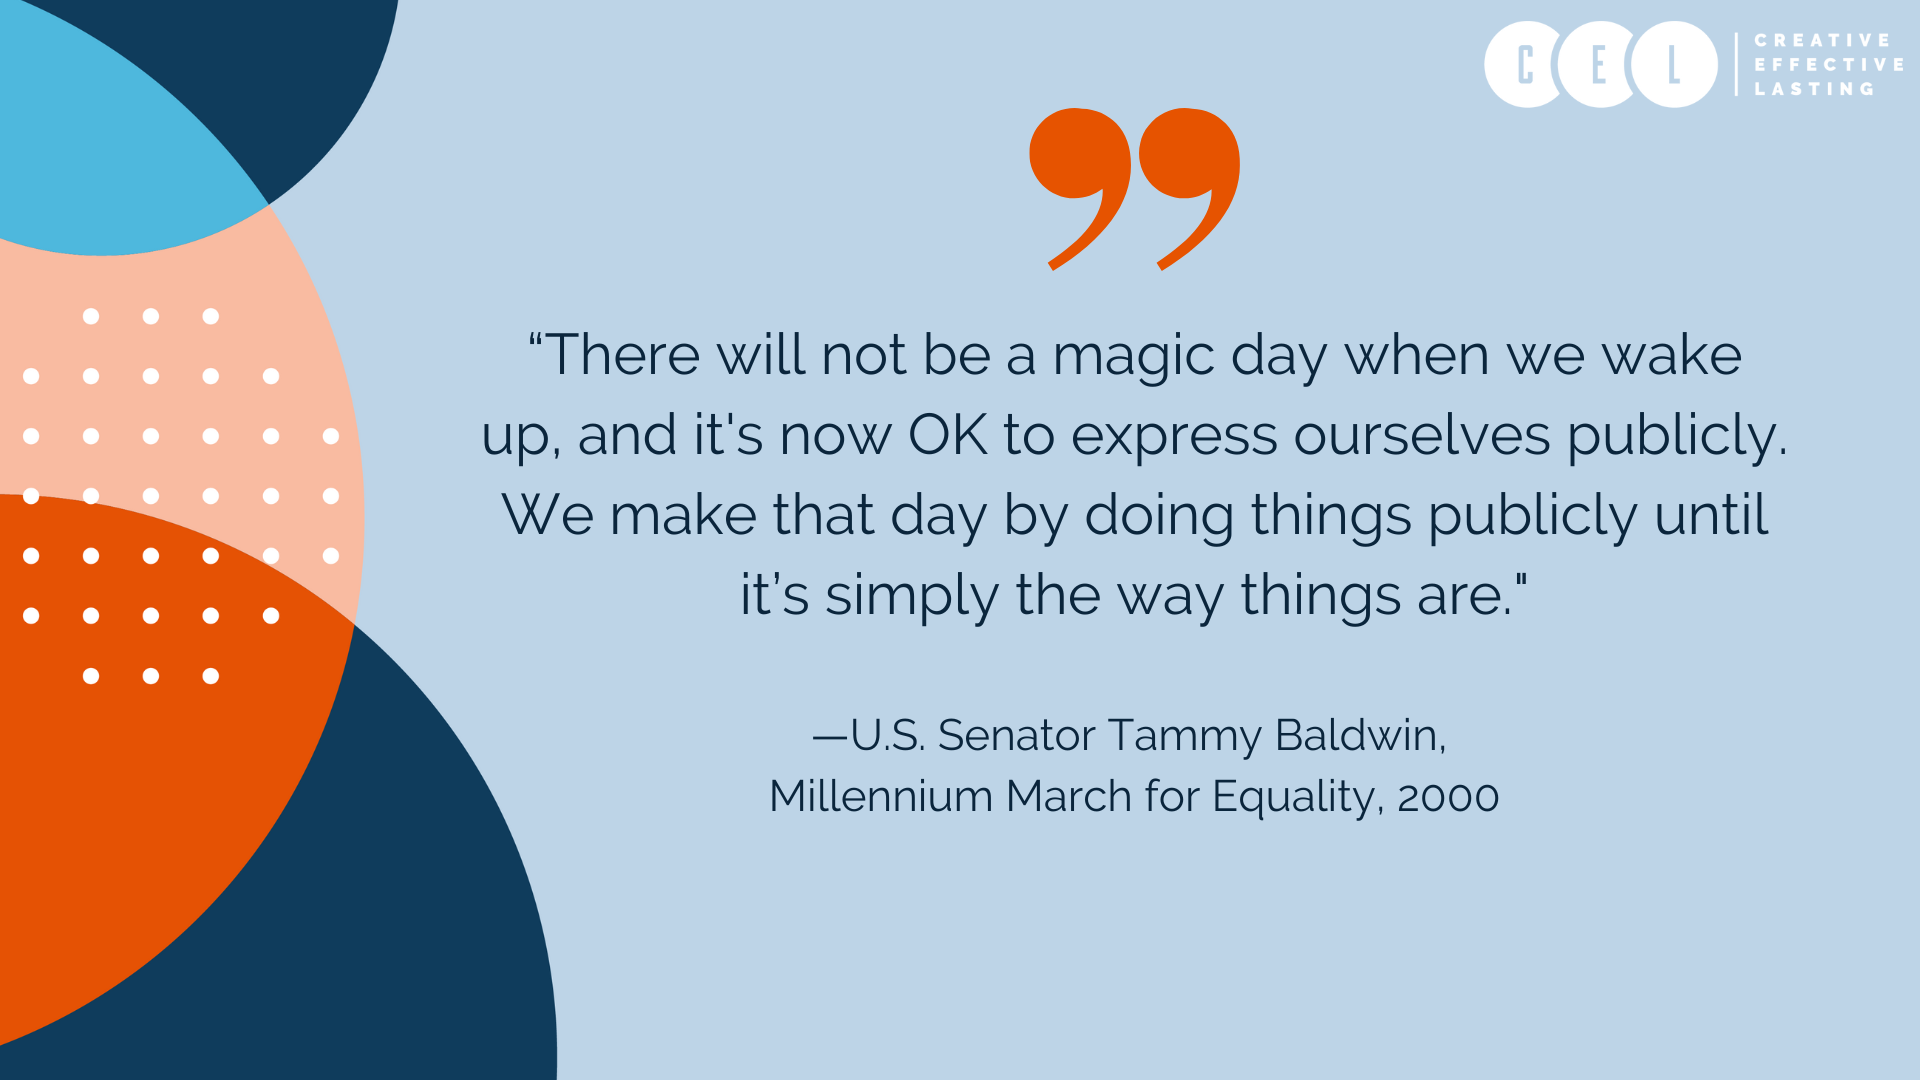 “There will not be a magic day when we wake up, and it's now OK to express ourselves publicly. We make that day by doing things publicly until it’s simply the way things are." —U.S. Senator Tammy Baldwin, from her "Never Doubt" speech at the Millennium March for Equality, 2000